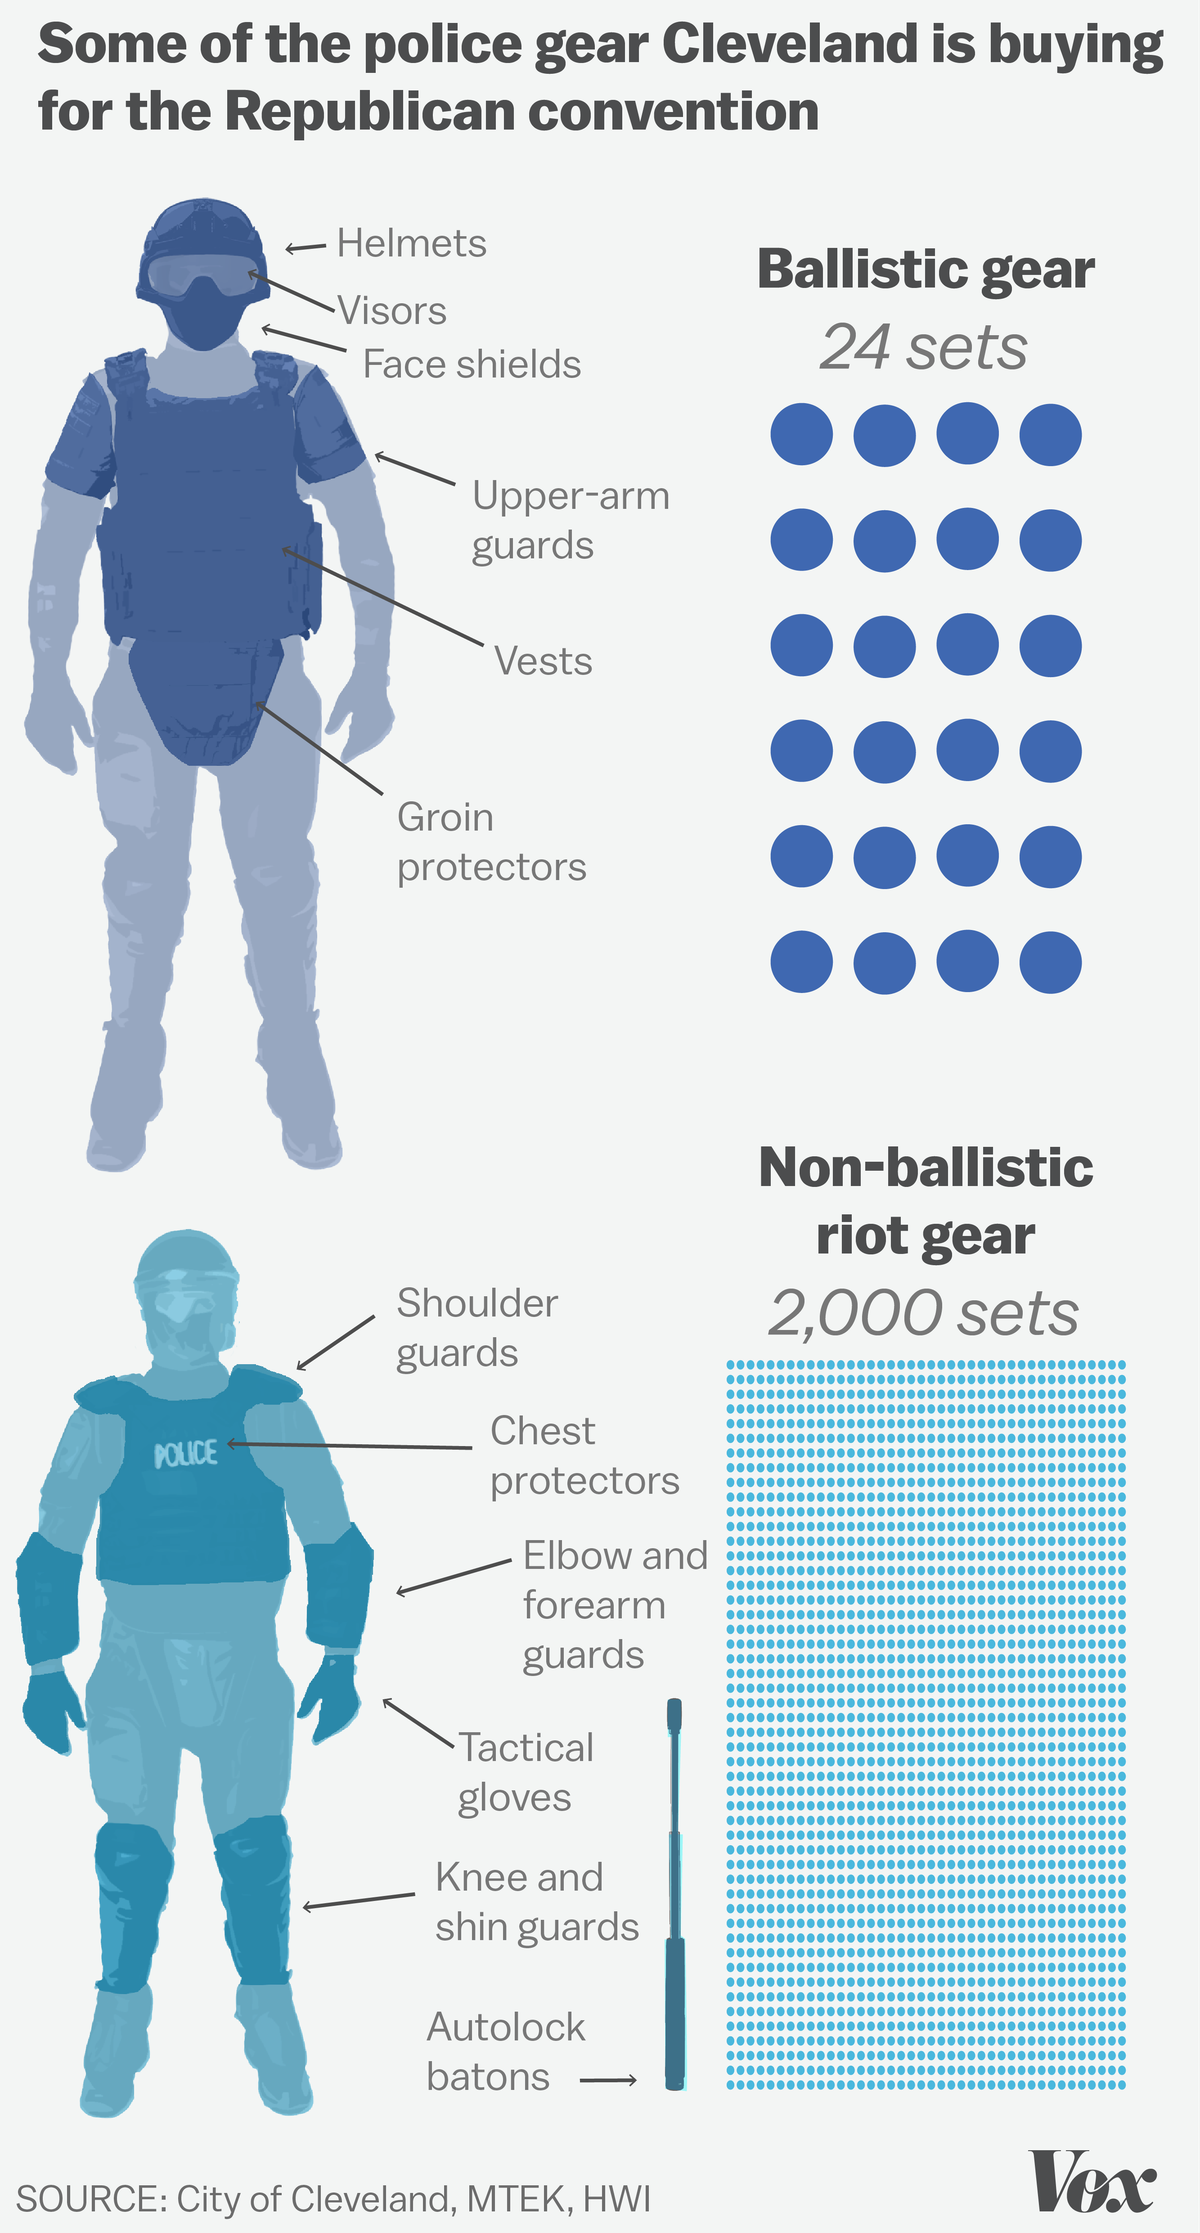 Cleveland will buy 2,000 sets of non-ballistic riot gear and 24 sets of ballistic gear.